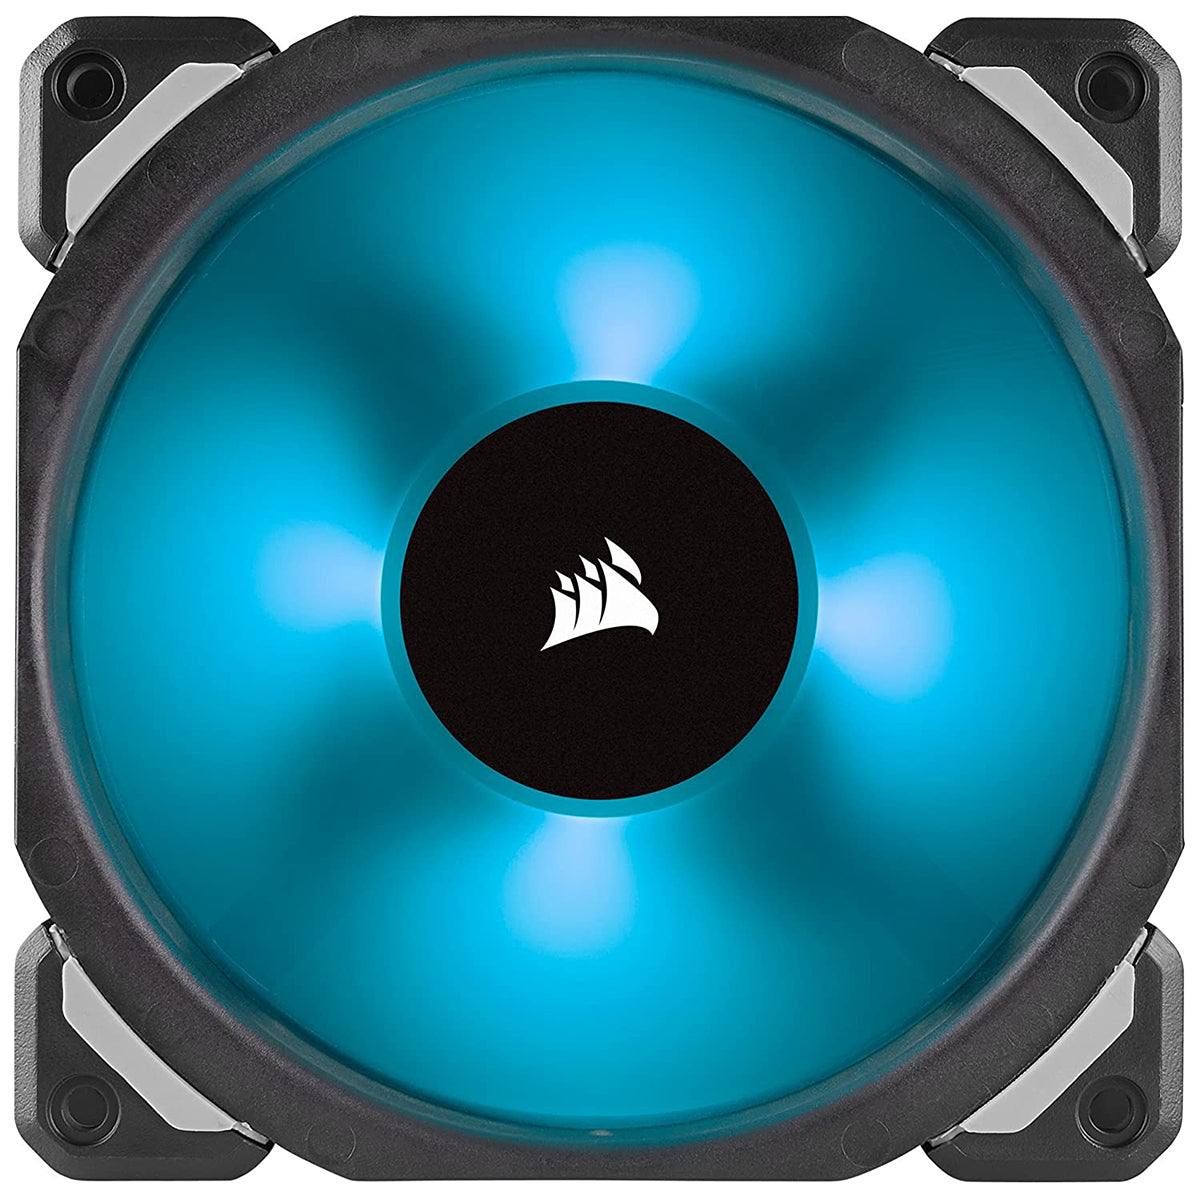 Corsair ML120 Case fan with Premium Magnetic Levitation 120mm RGB LED Fan From TPS Technologies